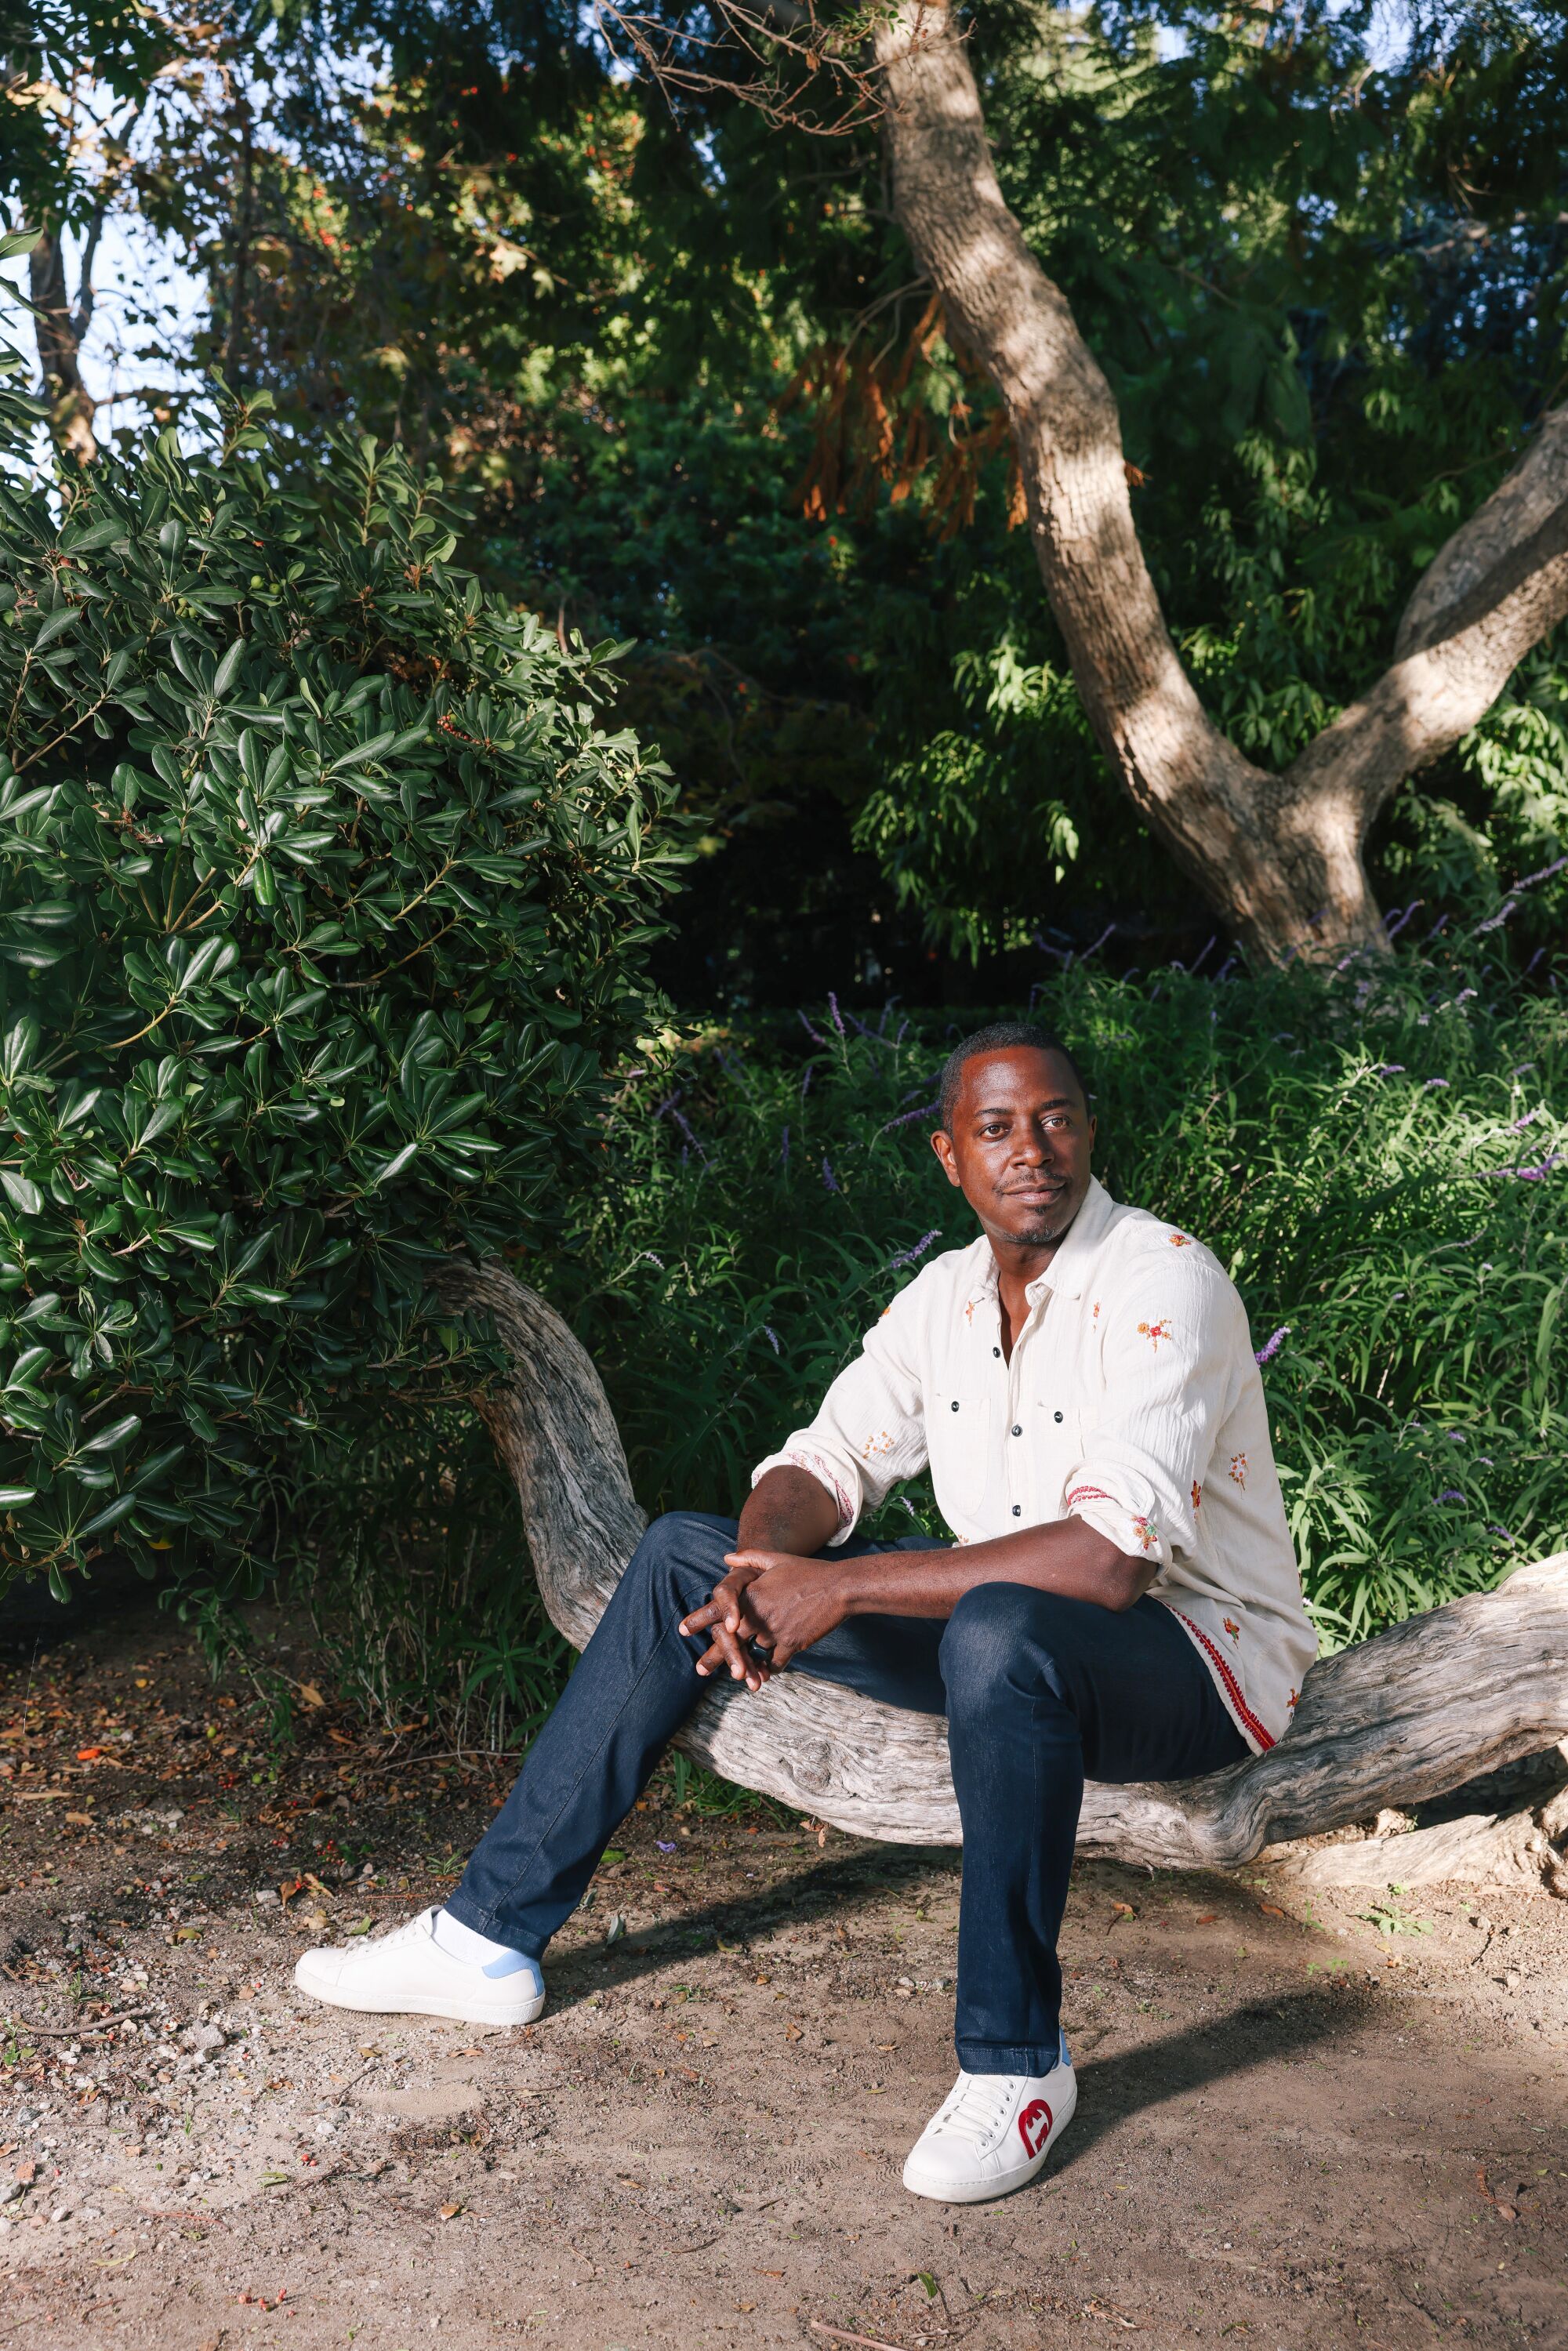 Sanford Biggers sits on a low tree branch in a cream colored shirt and dark blue jeans